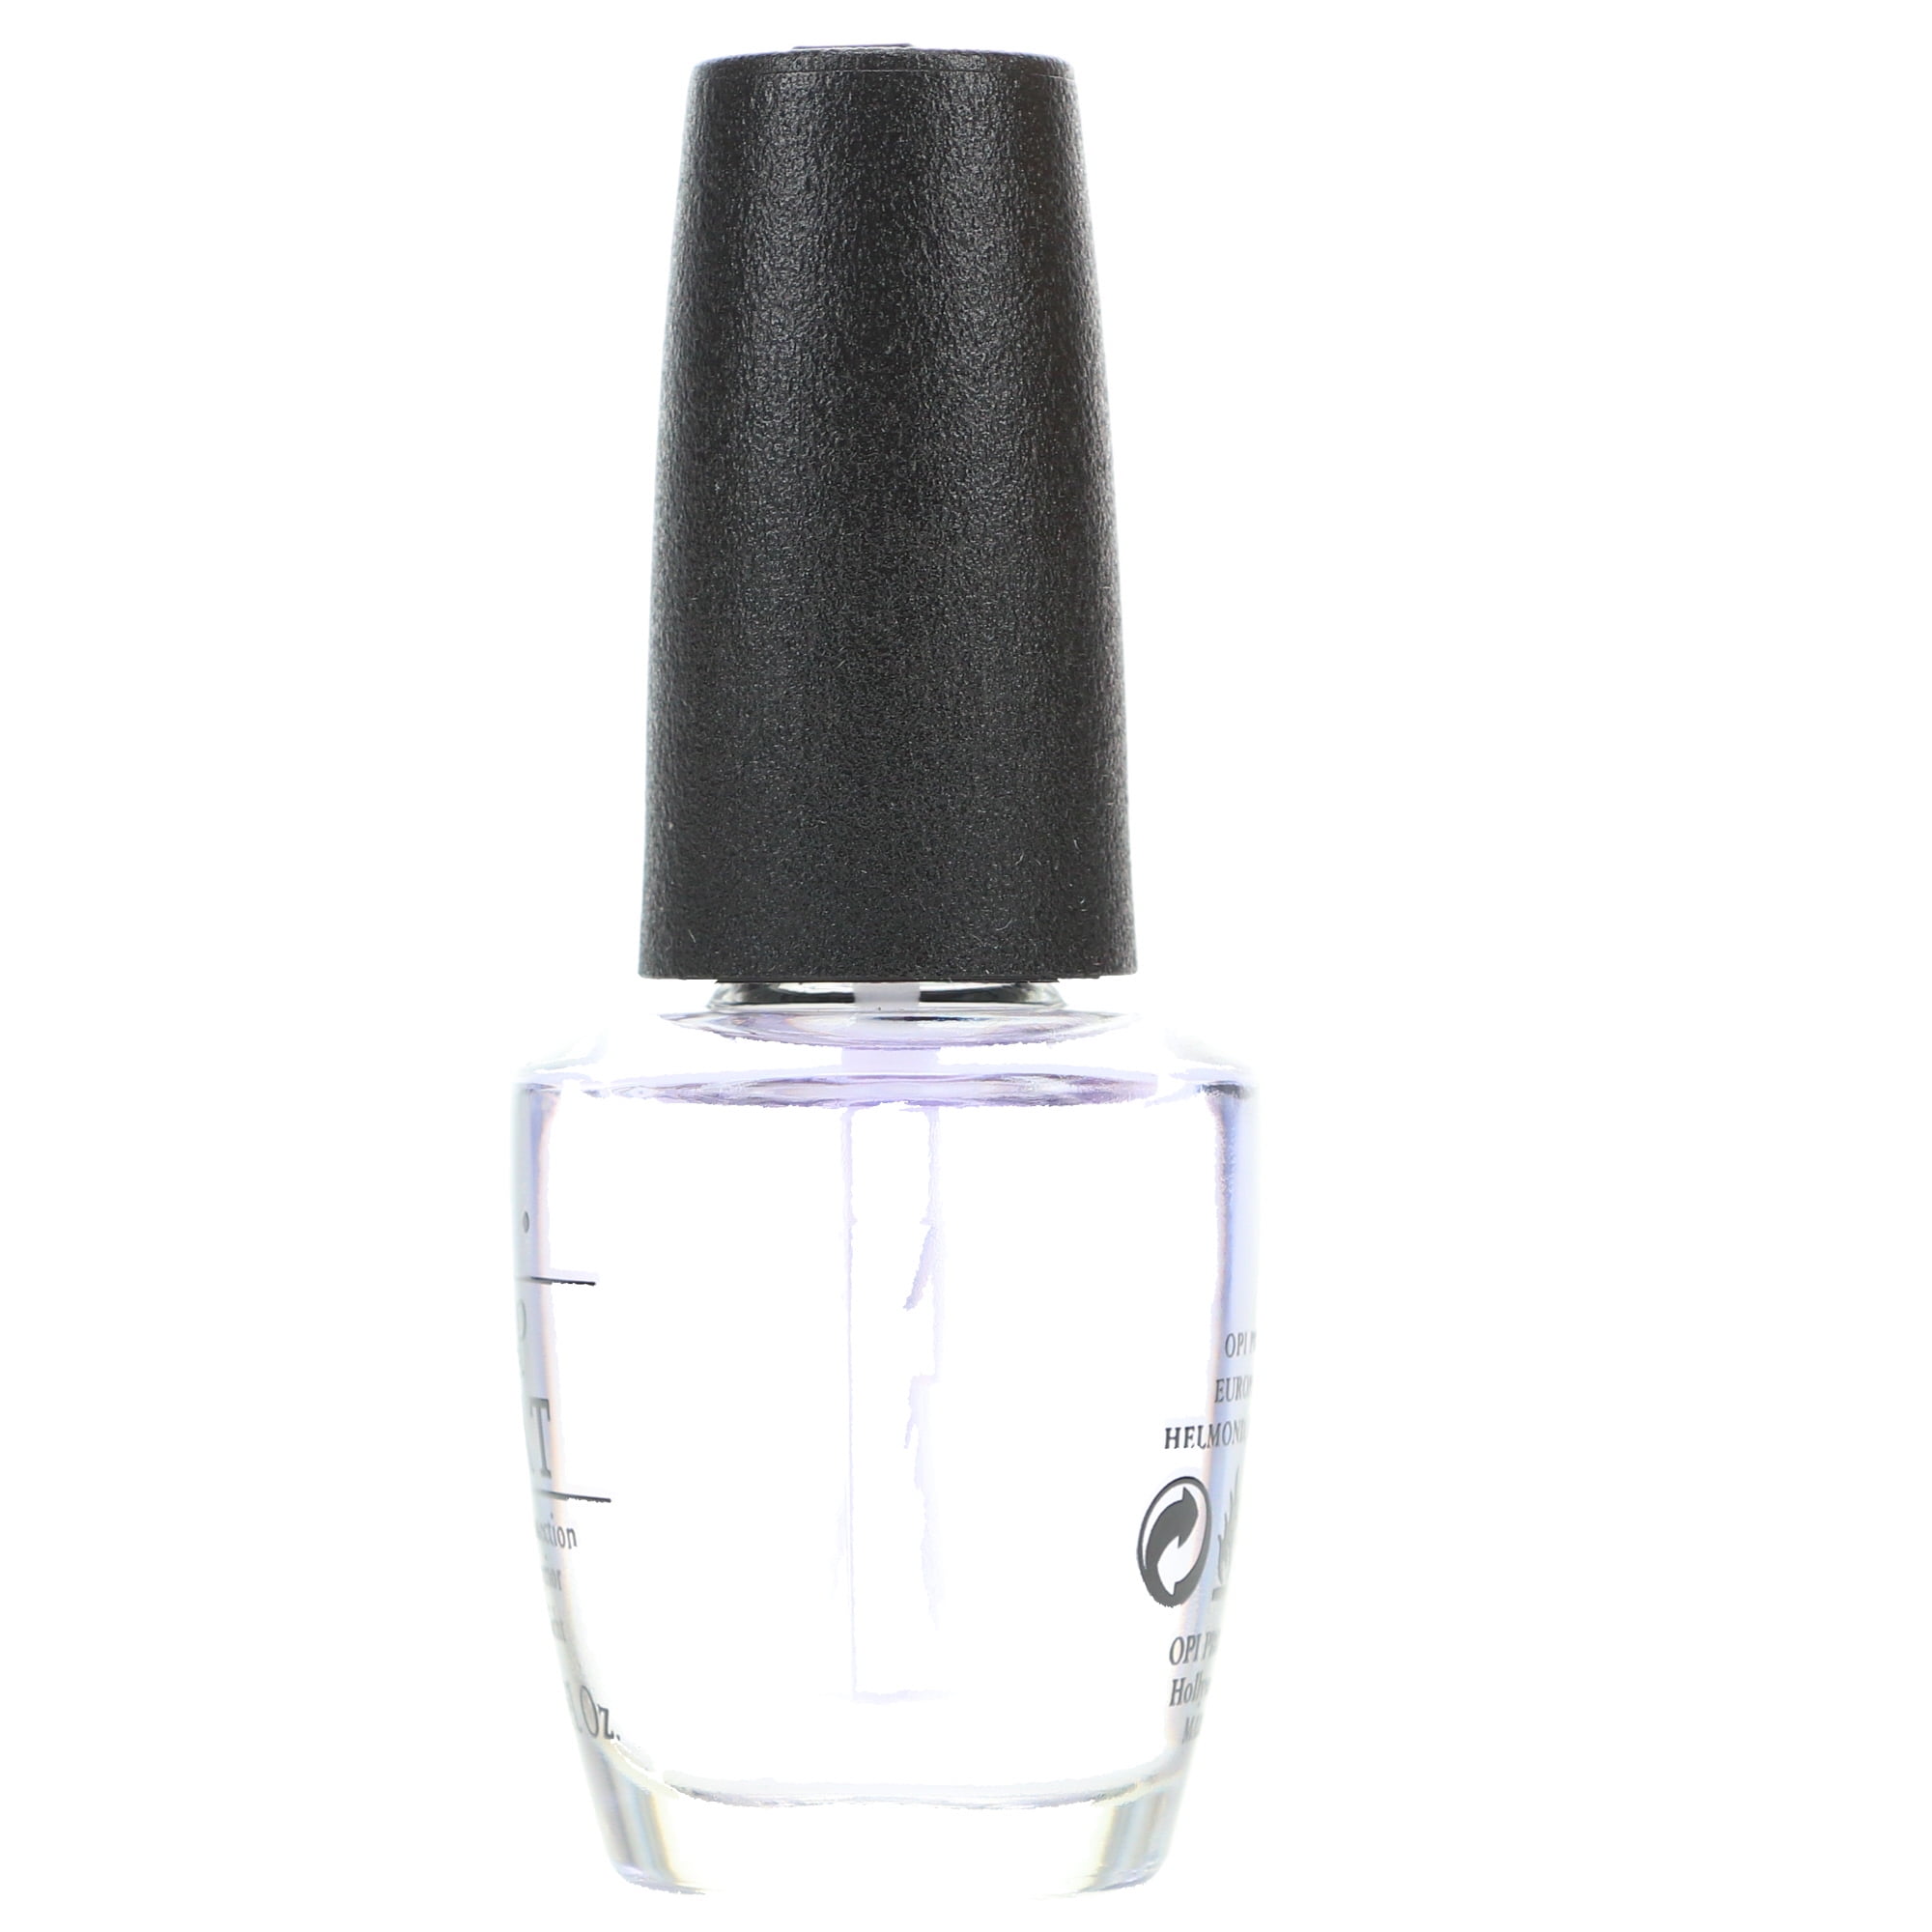 Buy O.P.I Nail Lacquer Online